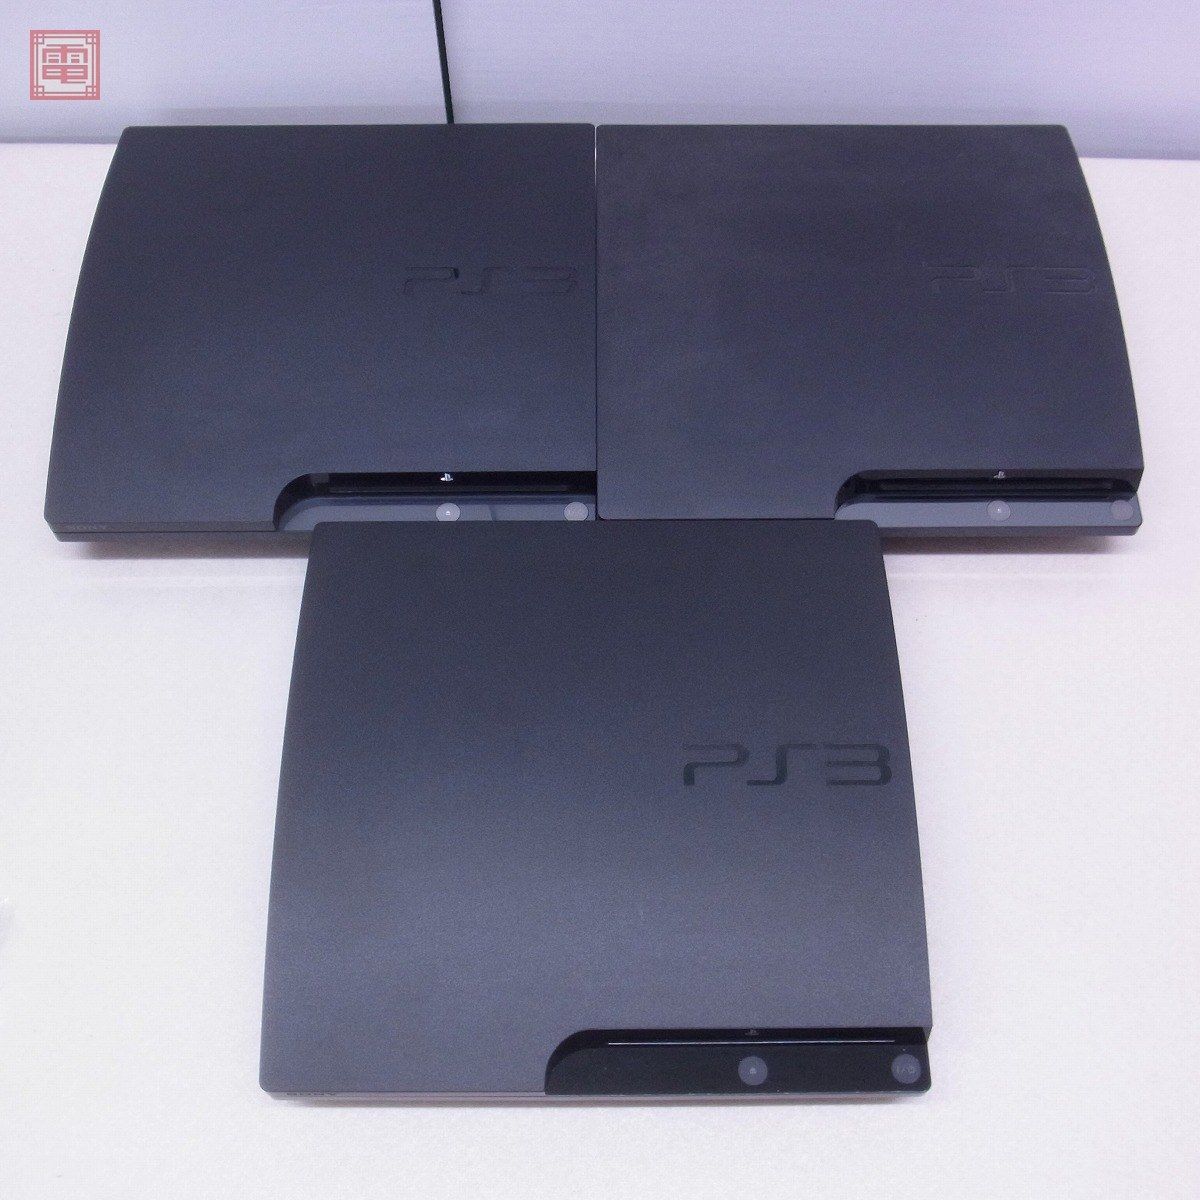 PS3 プレステ3 本体 CECH-2000A/2500A/3000A 計3台セット ソニー SONY 